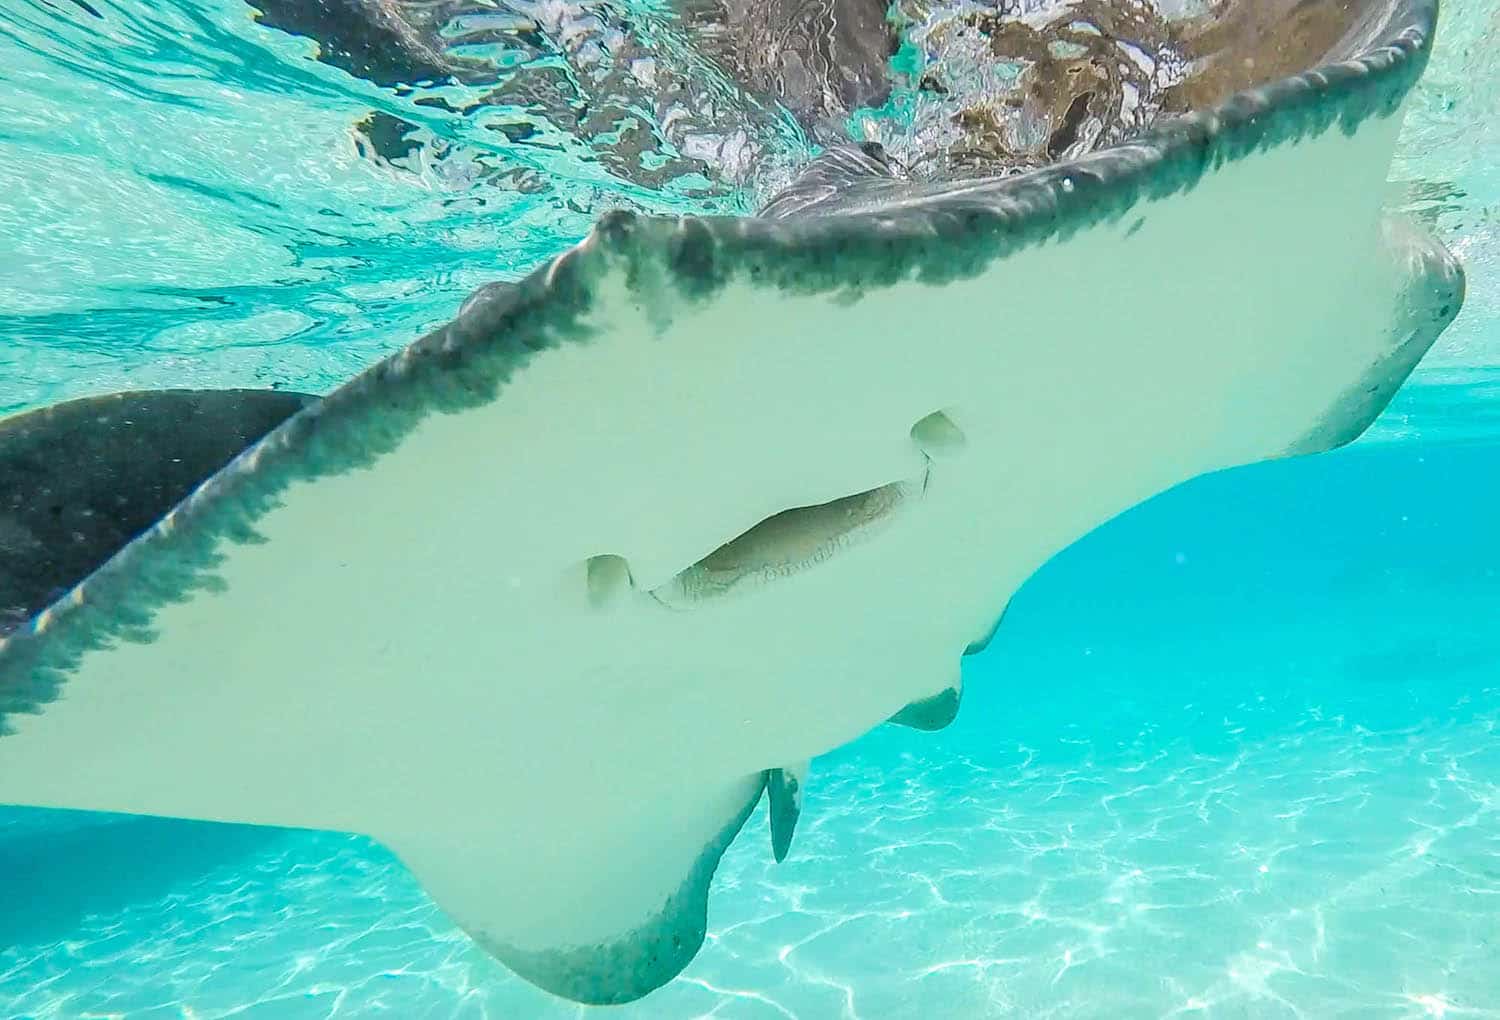 Sting rays in sting ray city, grand cayman